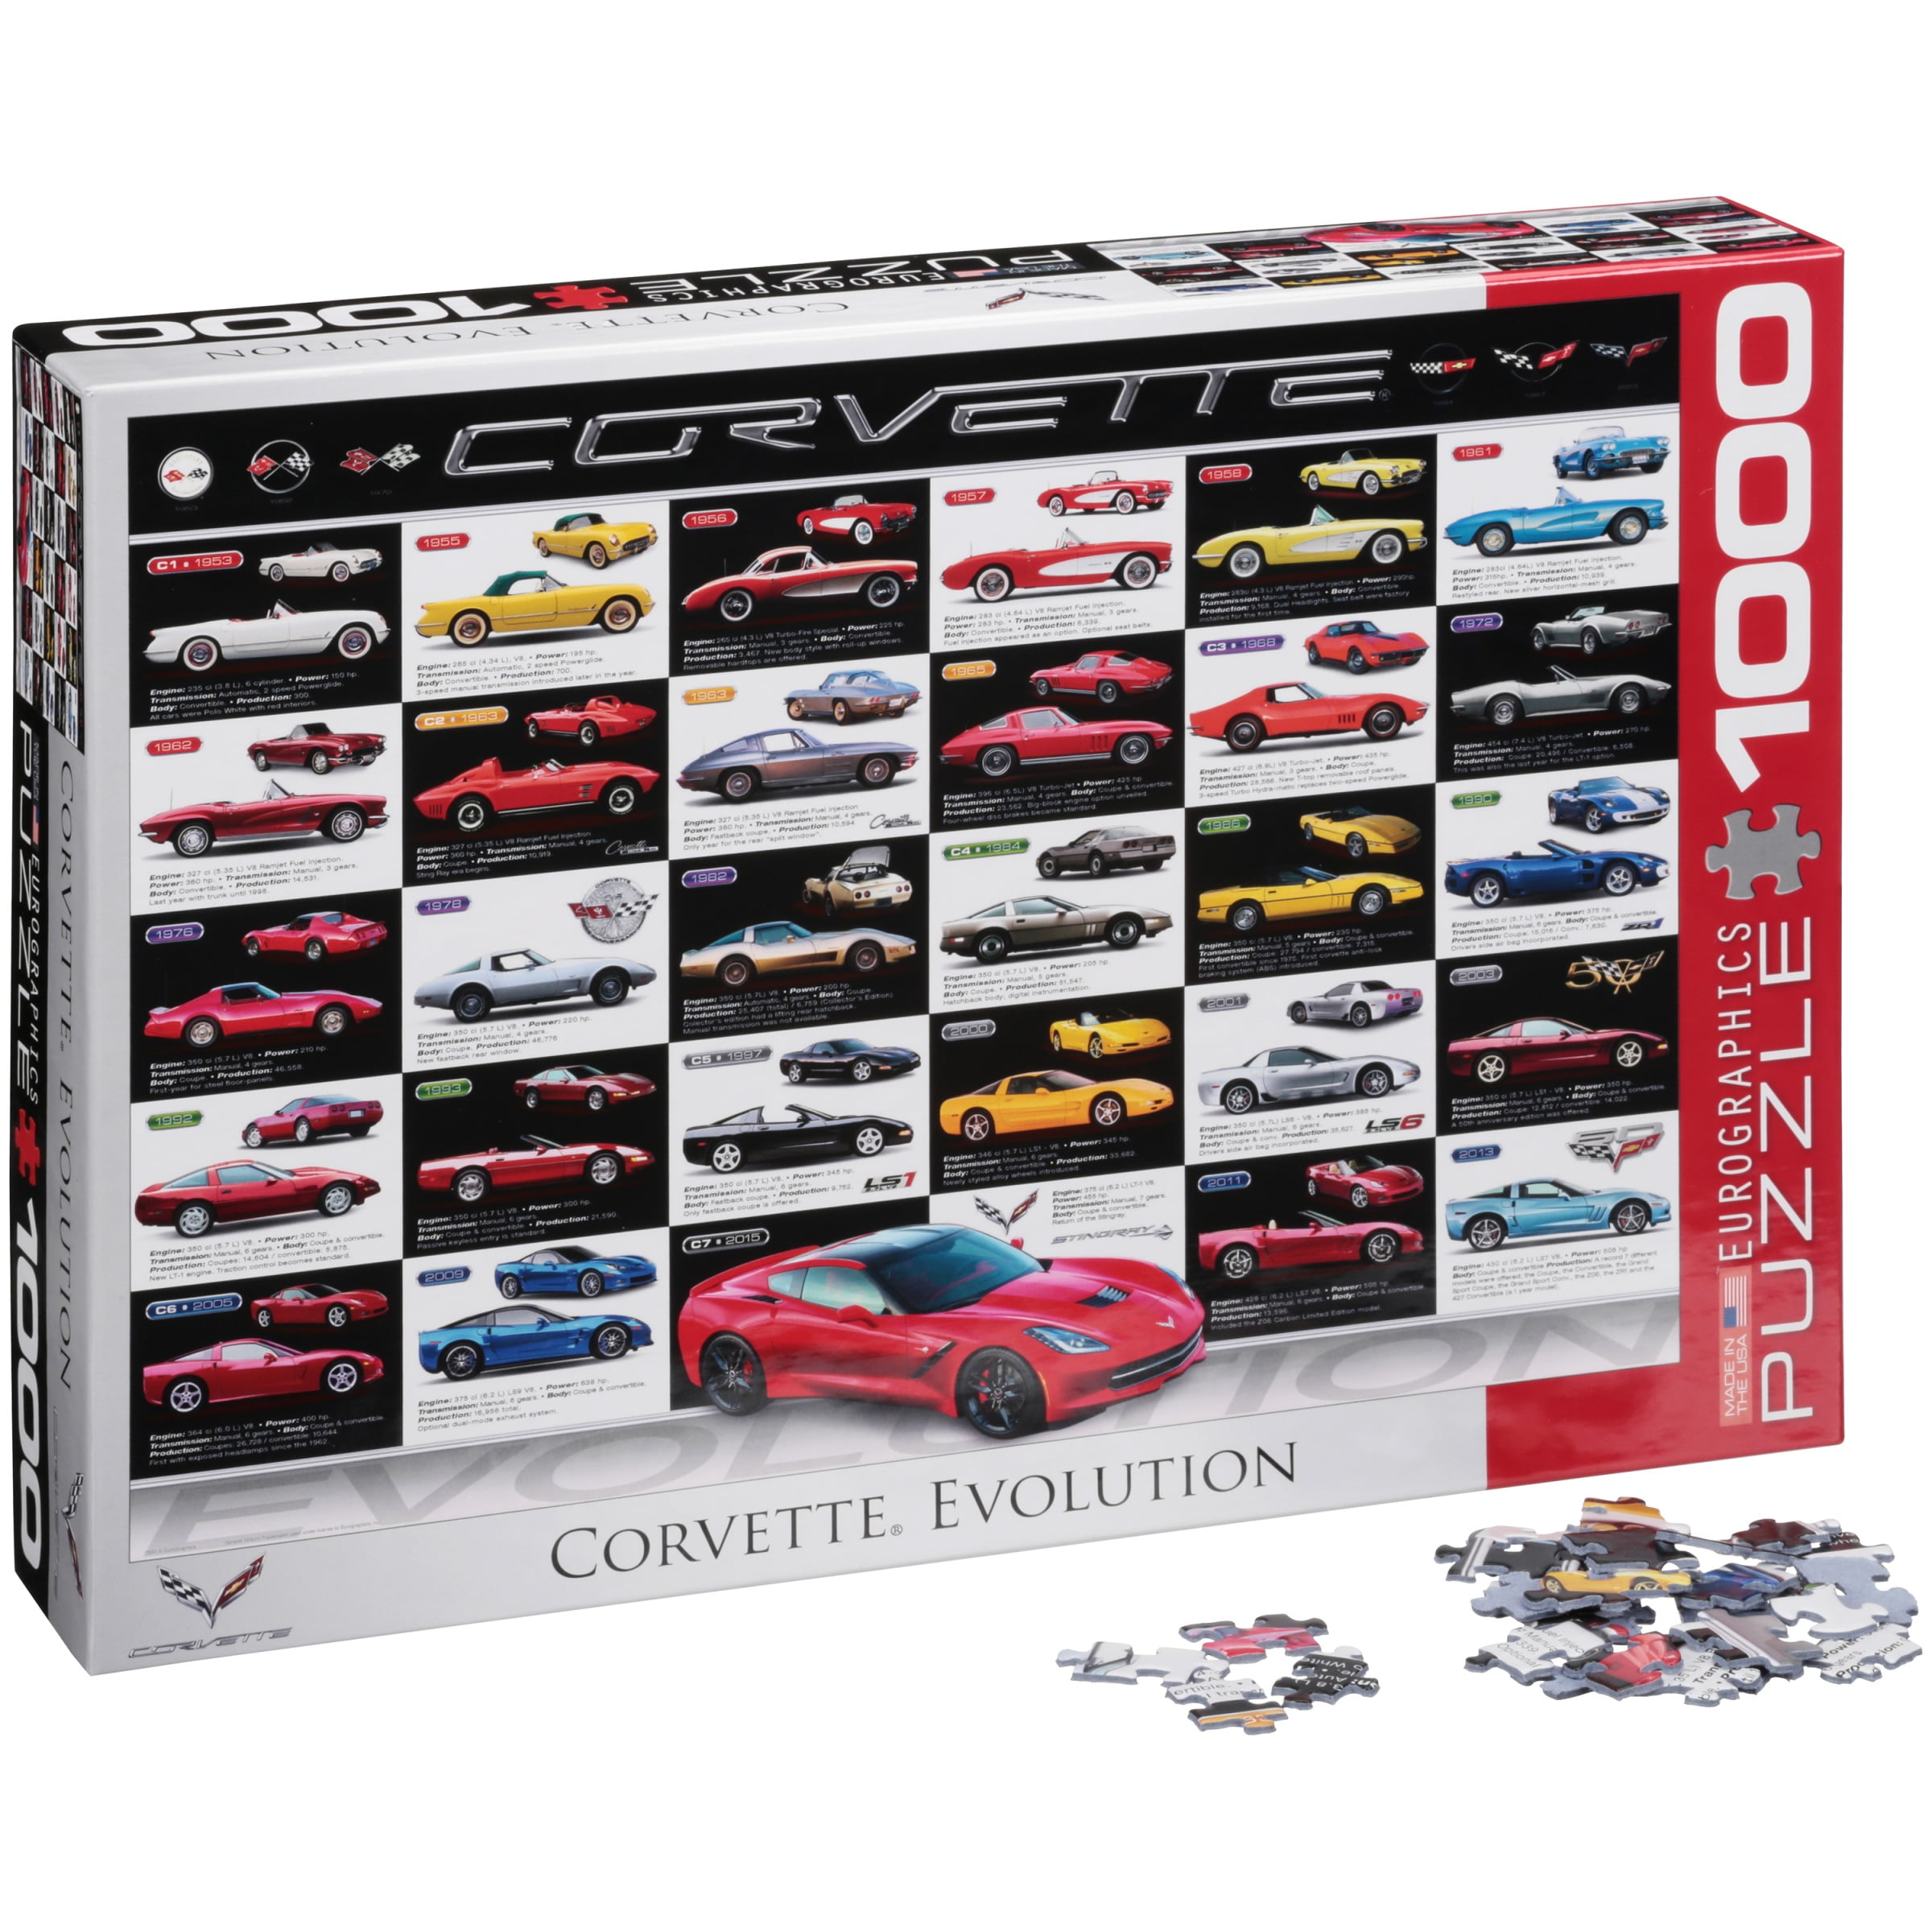 By Greg Girdano 1000-Piece Toys 1959 Corvette Out Of Jigsaw Puzzles Storage 